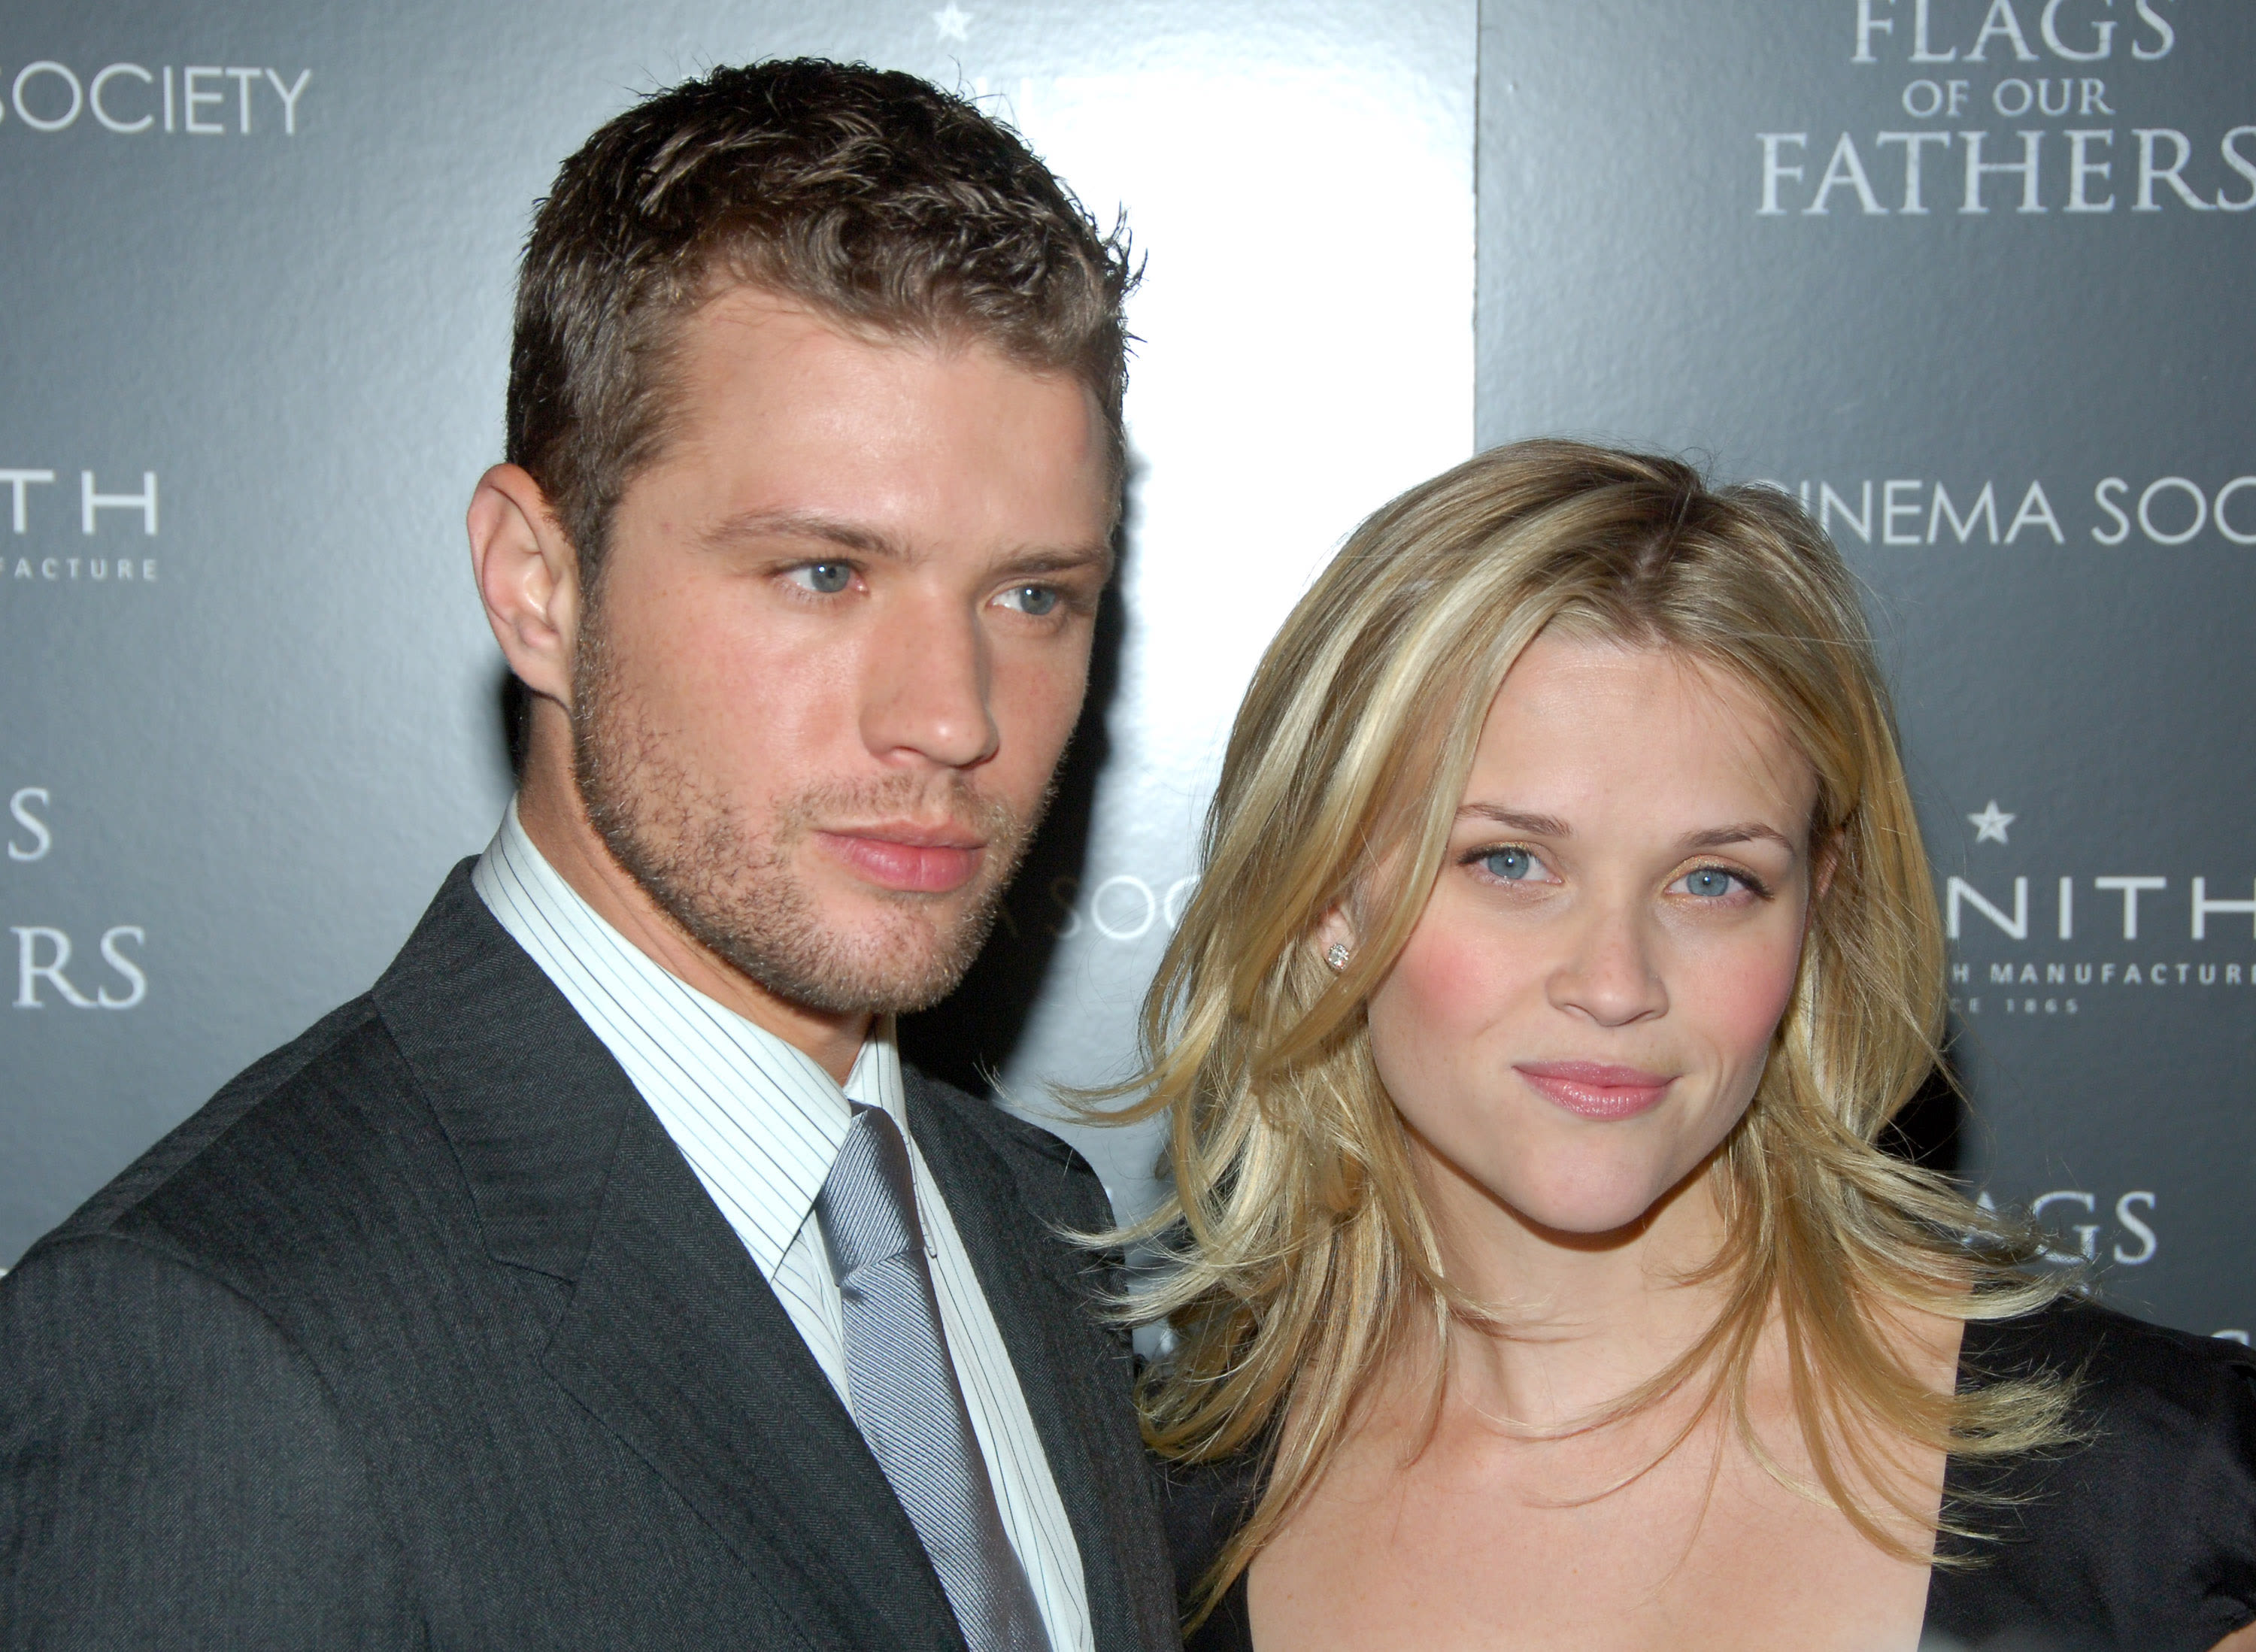 Ryan Phillippe Gushes Over Ex Reese Witherspoon in Throwback Pic: ‘So Much Cooler Than Today’